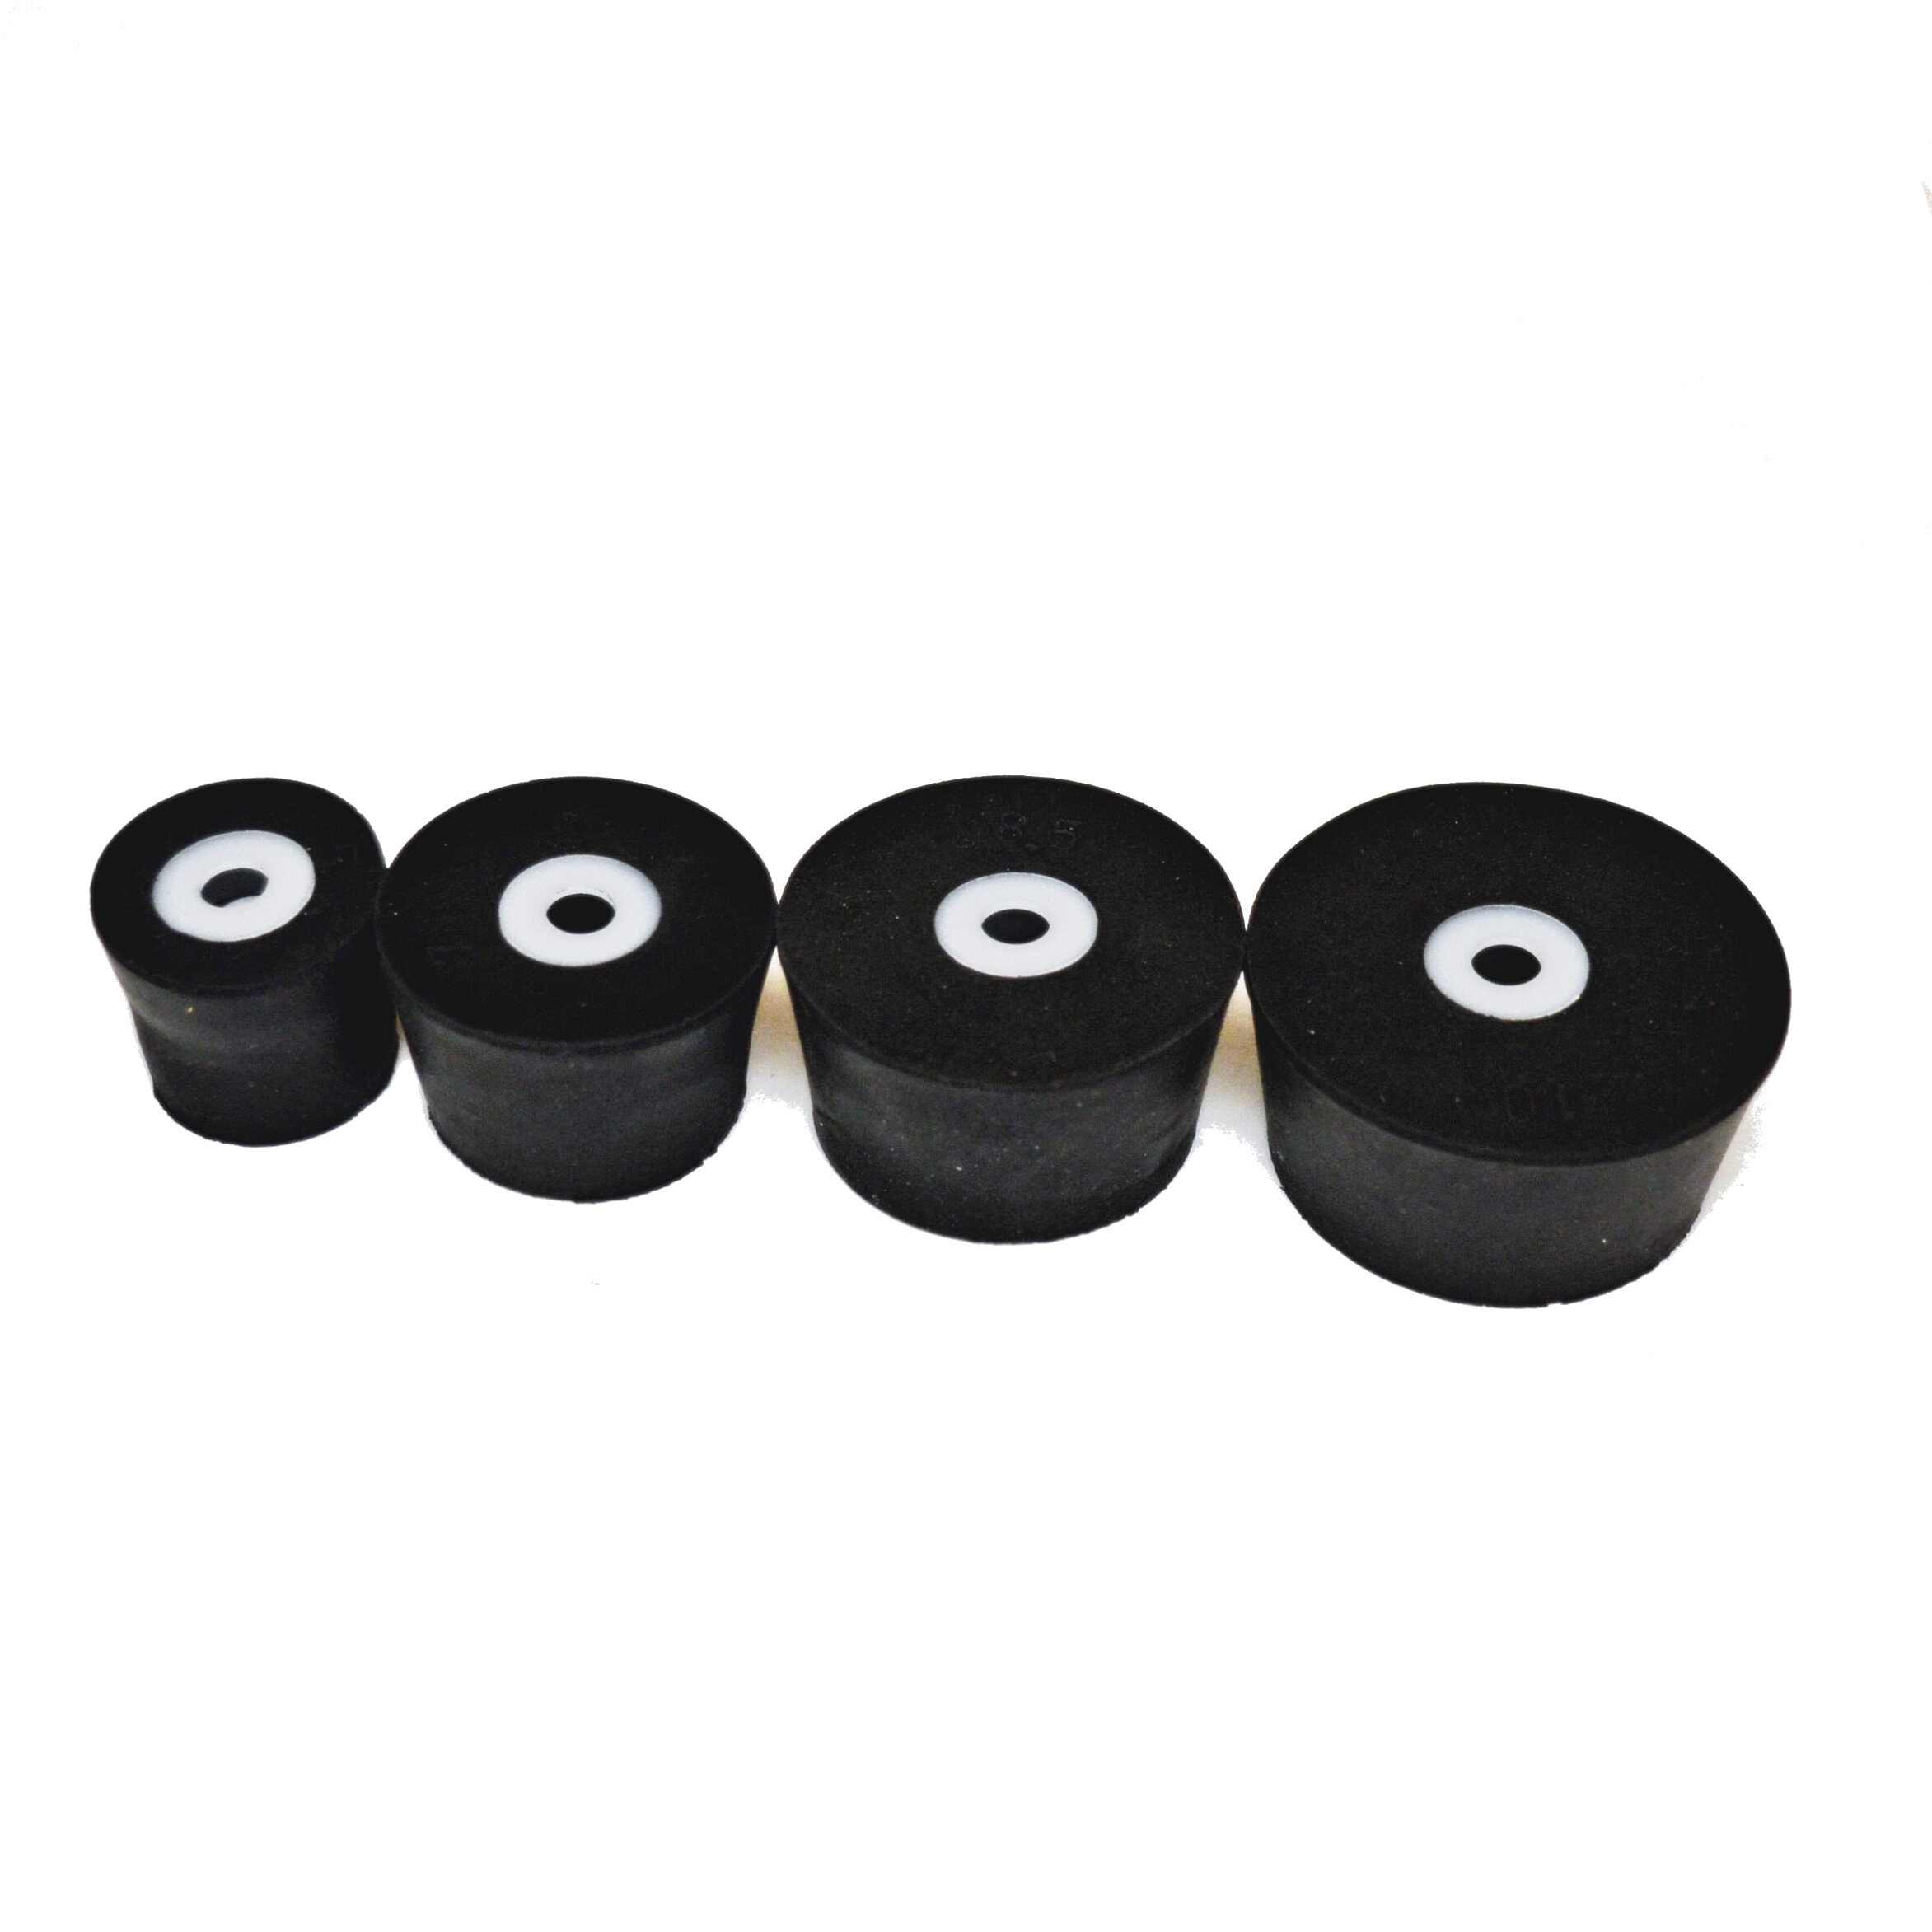 Fits 3/4 to1-1/2 kayak scupper holes Universal Kayak Scupper Plugs Best 4 Pack 